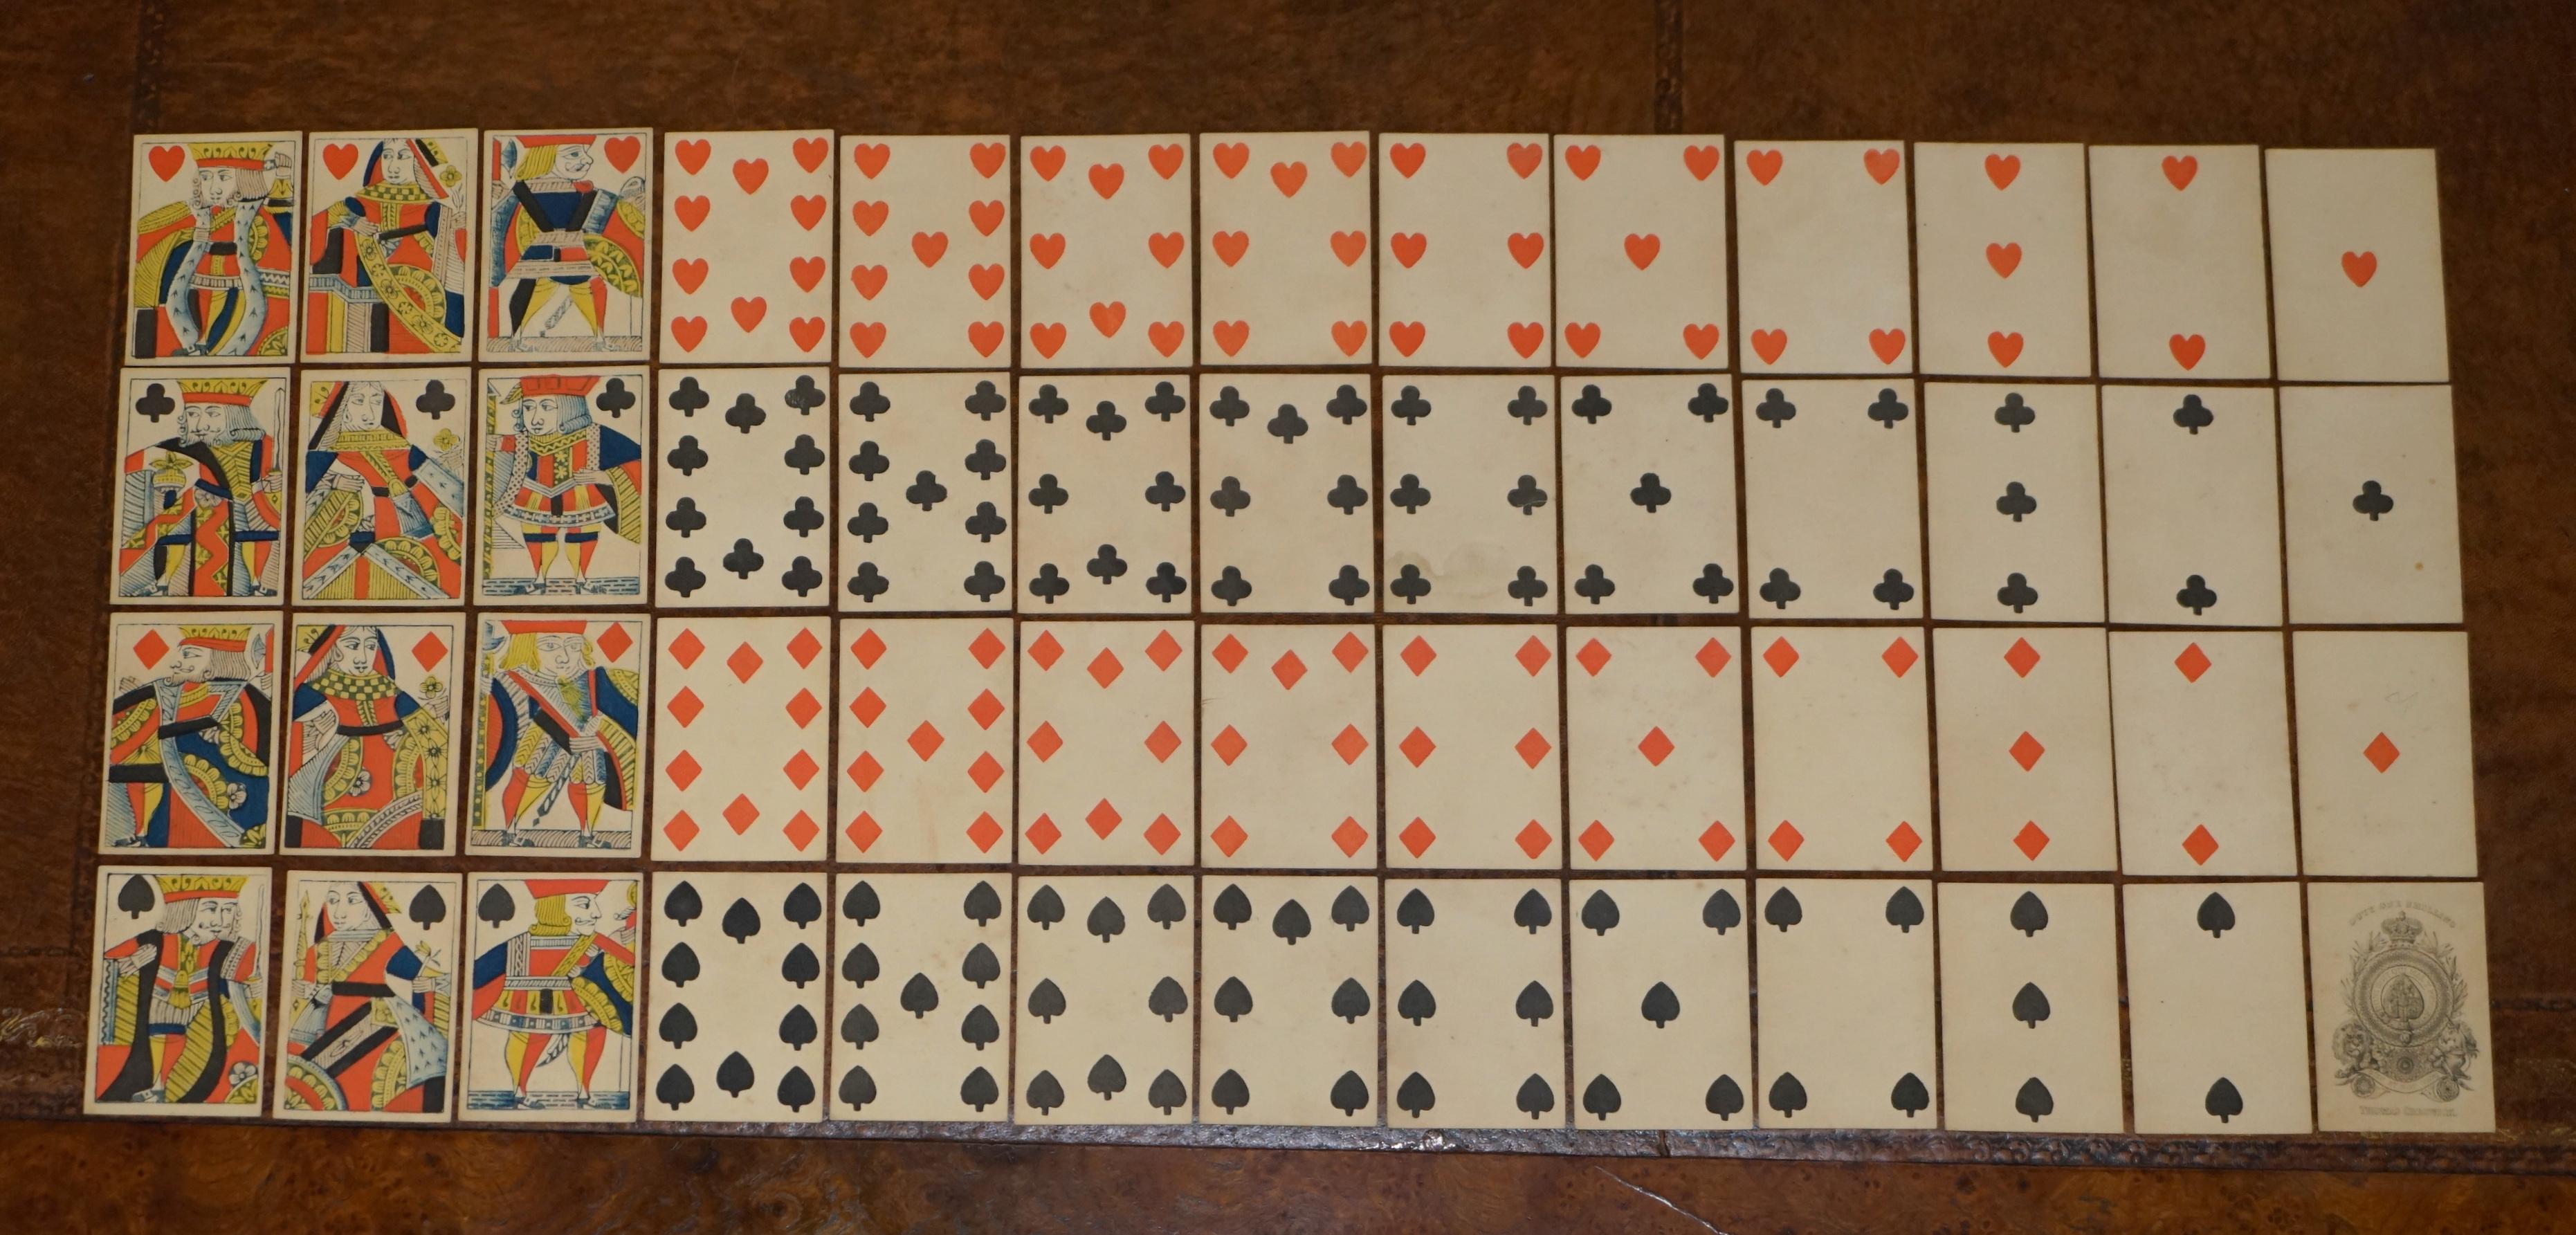 Royal House Antiques

Royal House Antiques is delighted to offer for sale this absolutely sublime original 1830 Thomas Creswick Georgian complete playing cards set with rare Fizzle Ace of spades

A truly lovely early suite, these are fine indeed,